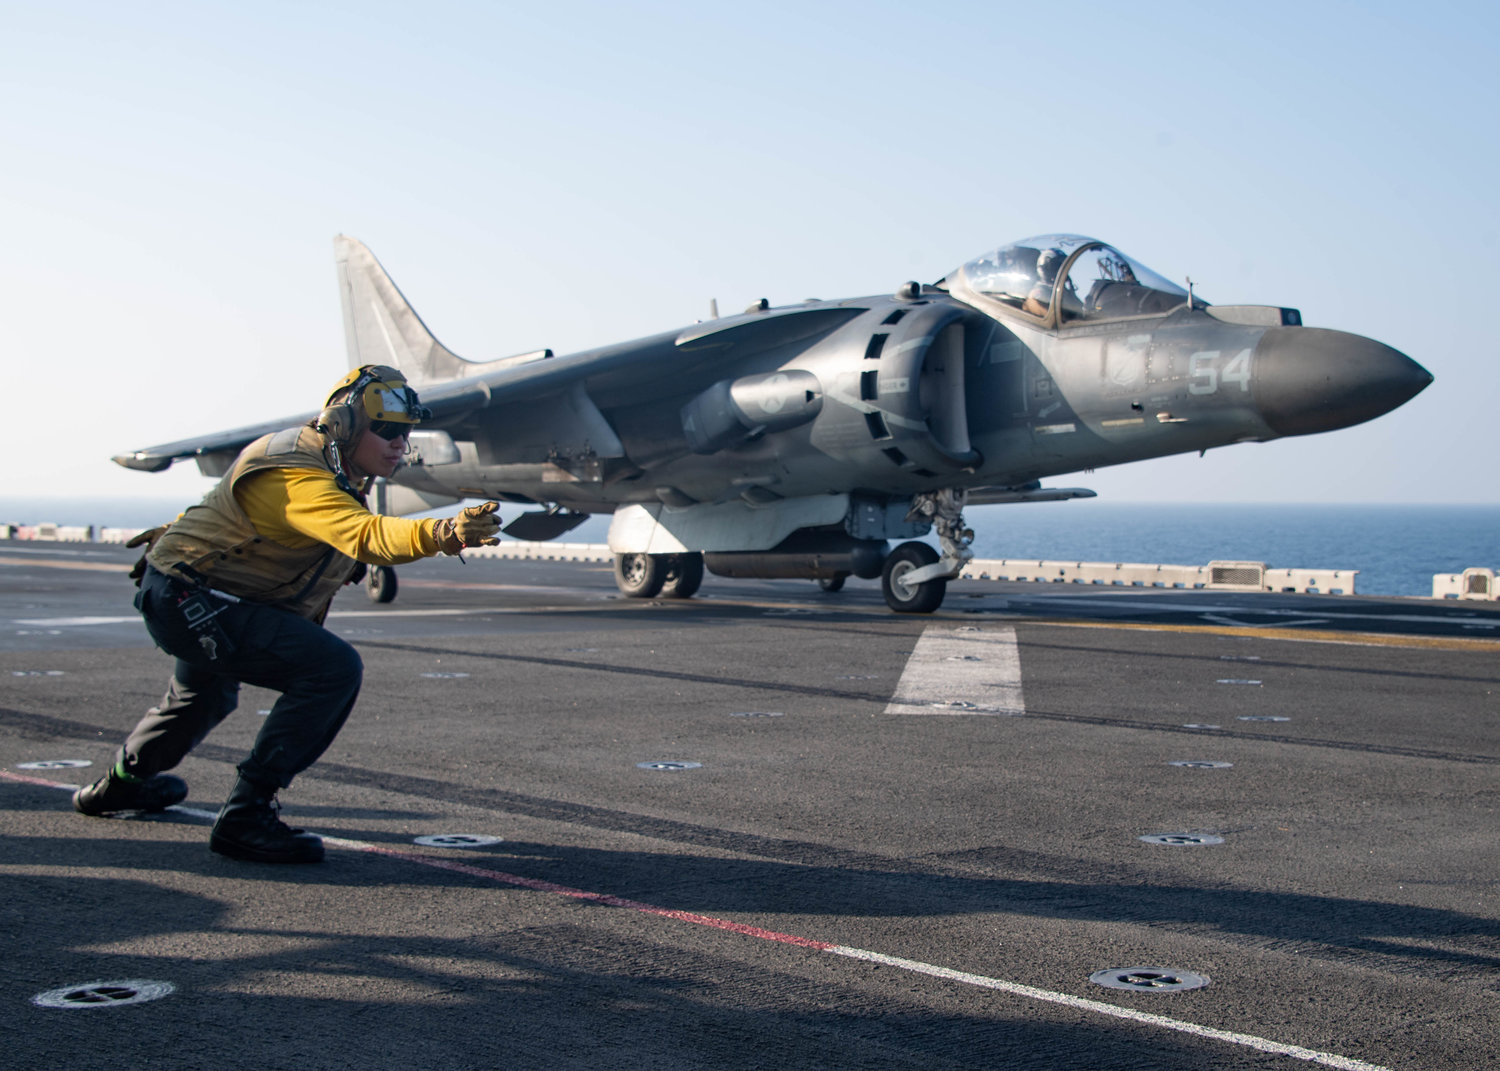 Aviation Boatswain’s Mate 3rd Class Alysa Sanchez, from Las Cruces, N.M., signals to an AV-8B Harrier attached to Marine Attack Squadron 214, 11th Marine Expeditionary Unit (MEU), as it takes off of the flight deck of the amphibious assault ship USS Essex (LHD 2), Jan. 4.